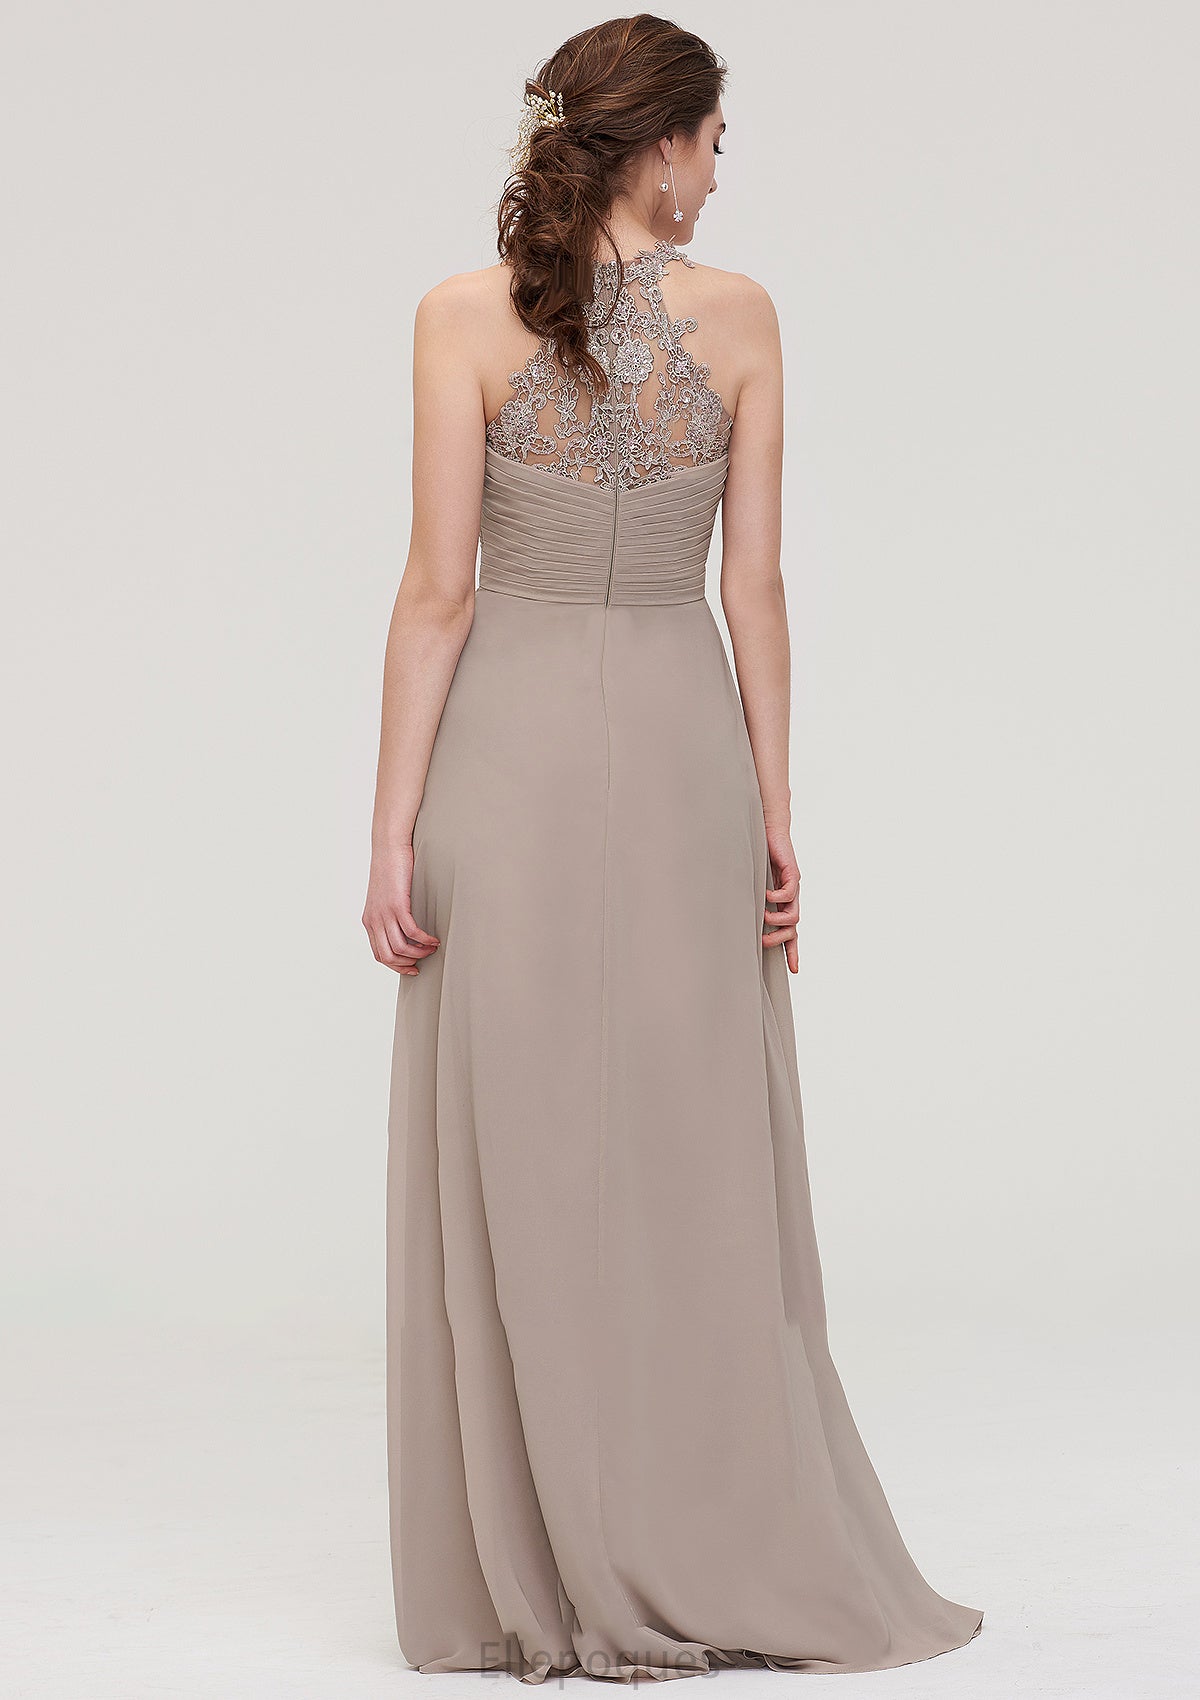 Sleeveless Sweetheart Long/Floor-Length Chiffon A-line/Princess Bridesmaid Dresses With Pleated Lace Delilah HOP0025457